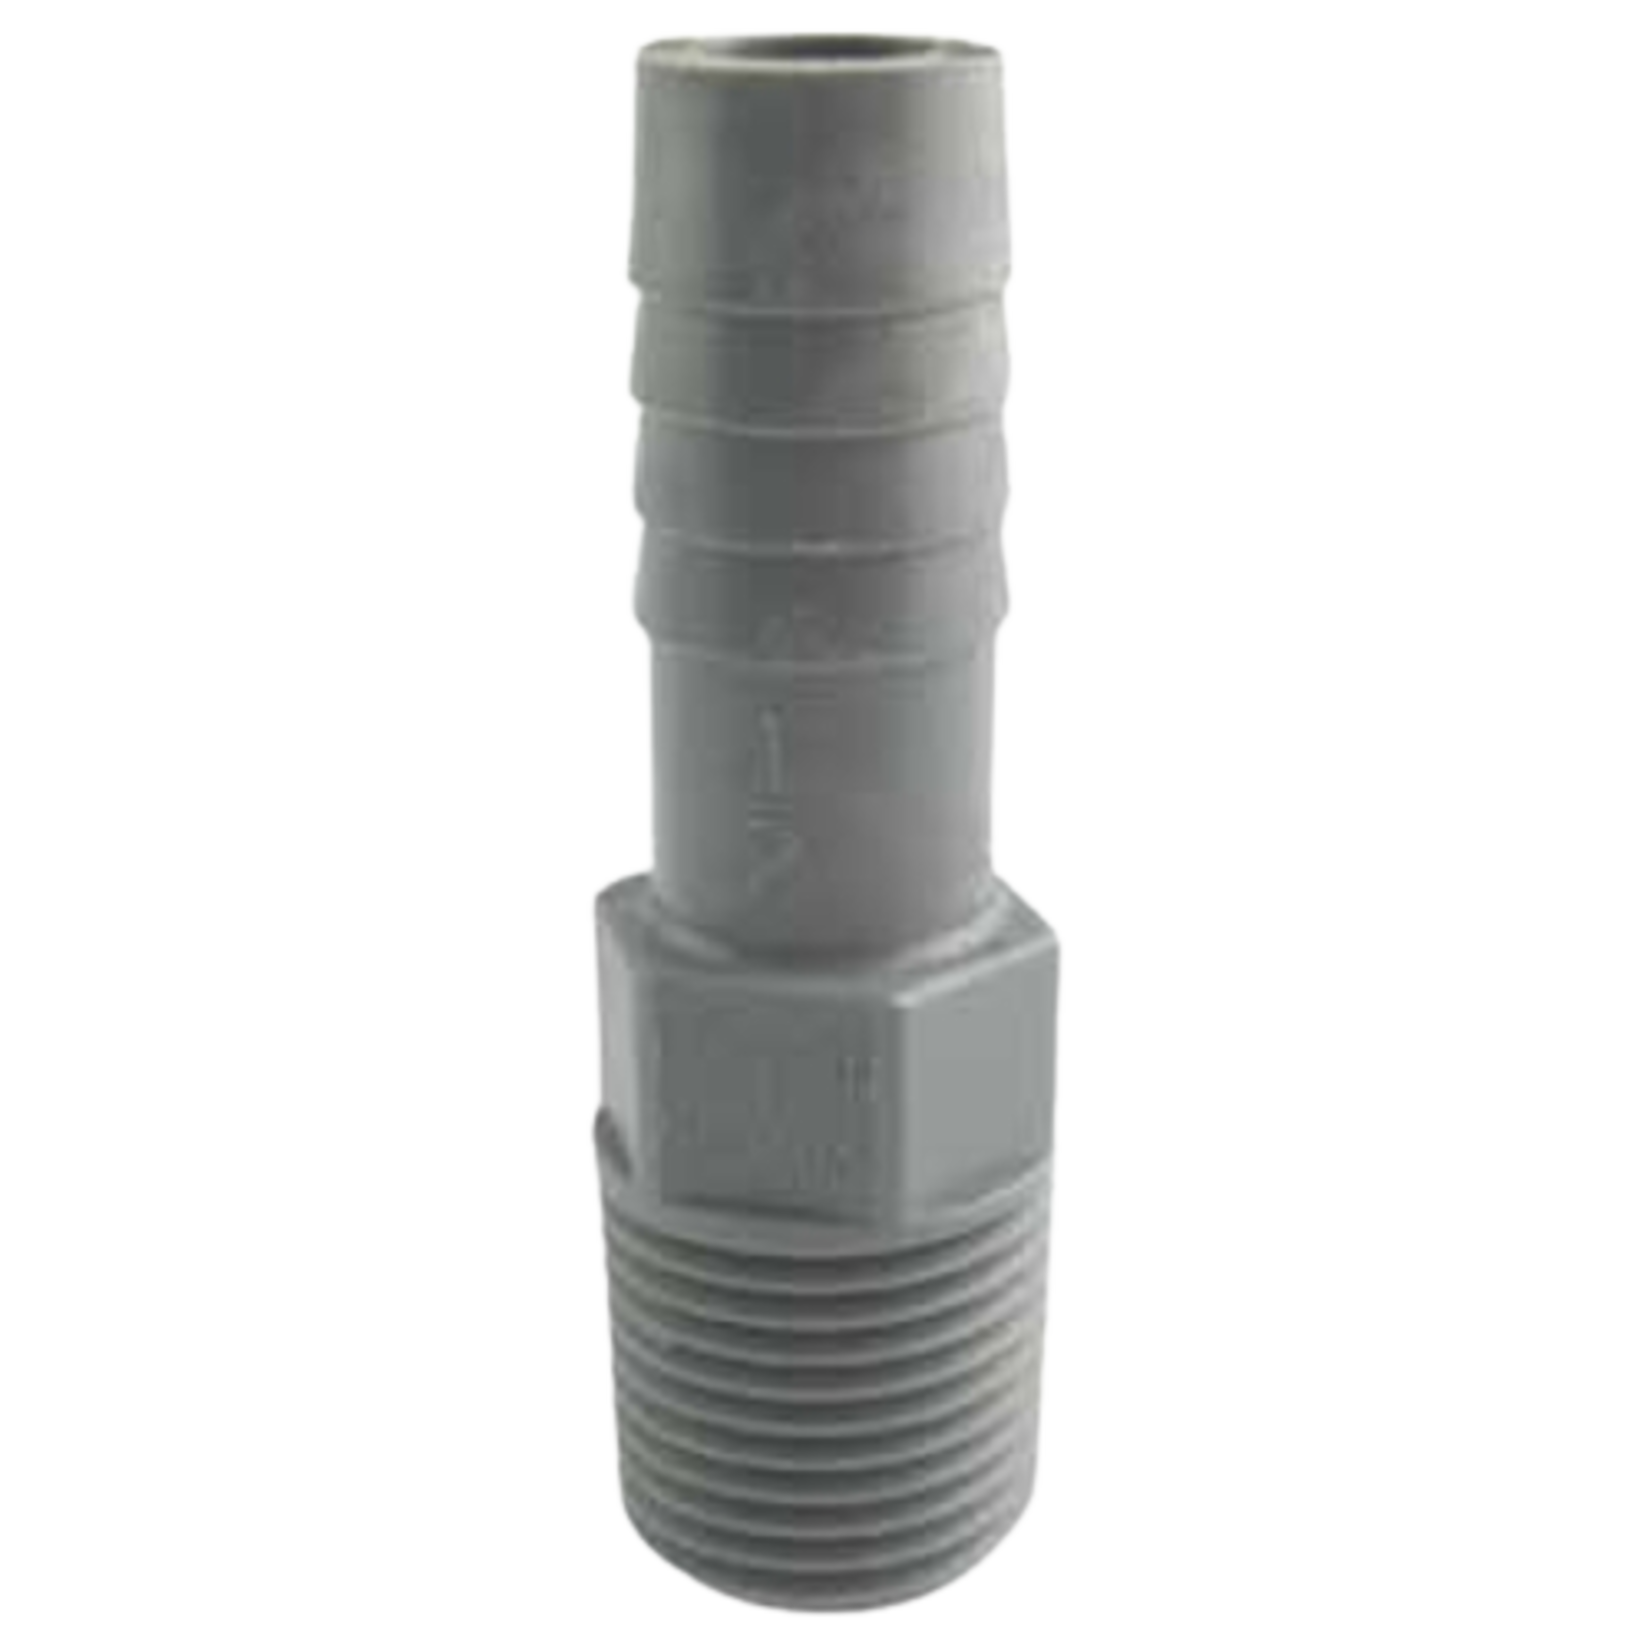 POLY INSERT ADAPTER COUPLING 1-1/2"